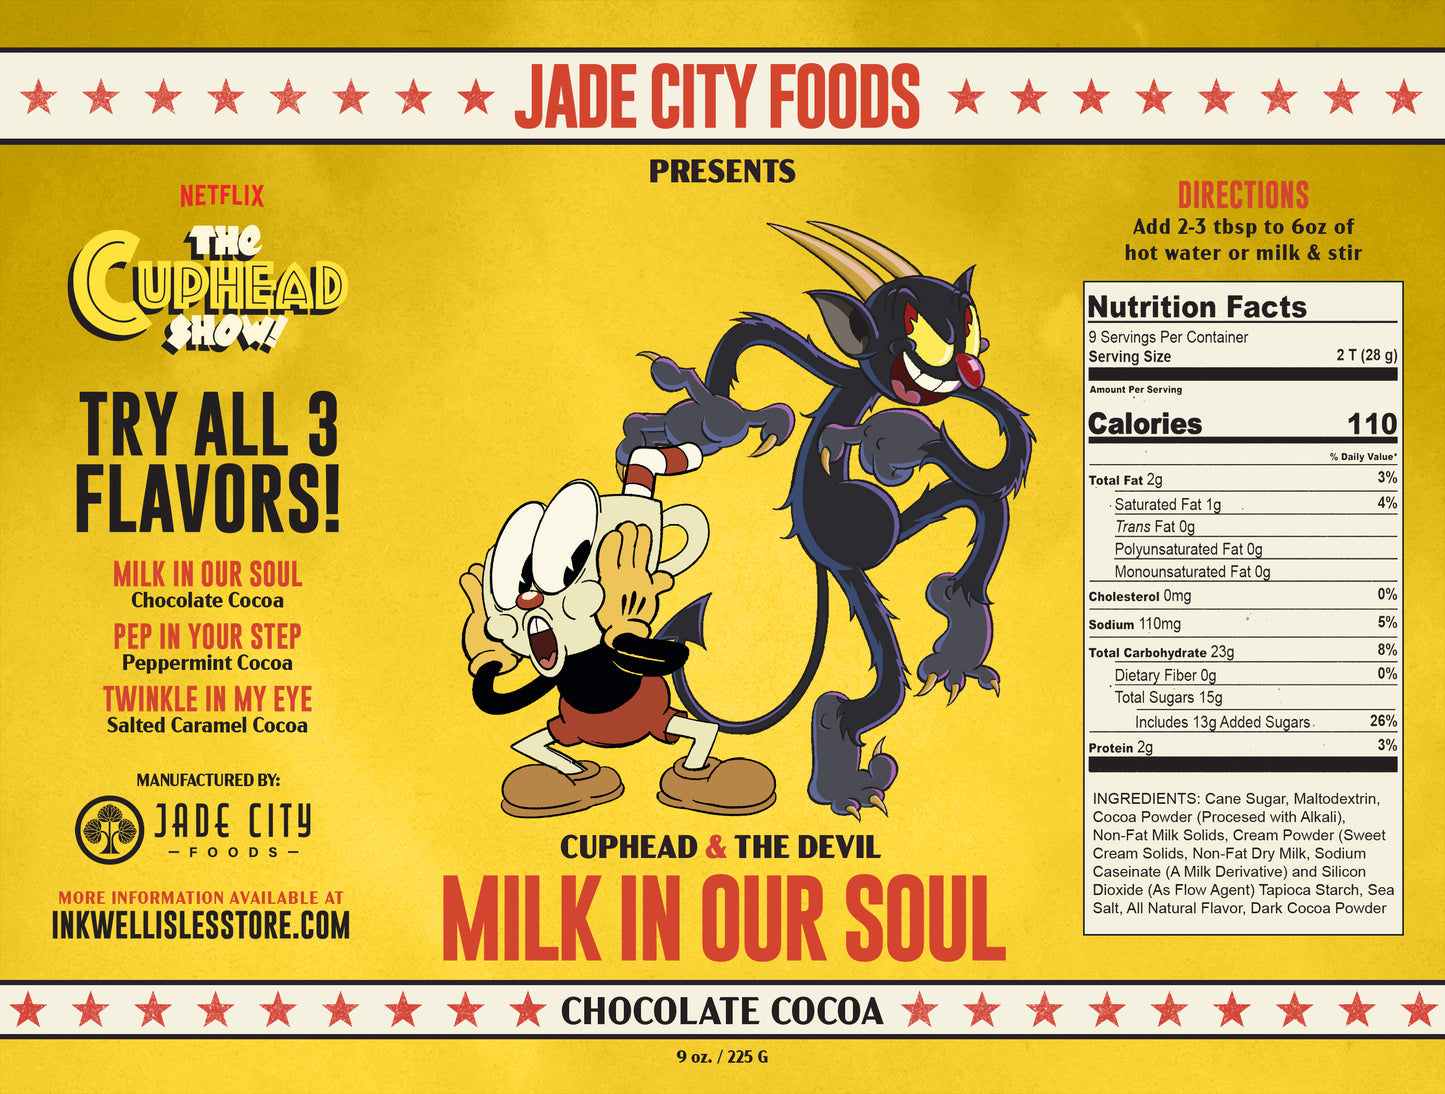 Cuphead & The Devil's Milk In Our Soul : Chocolate Cocoa